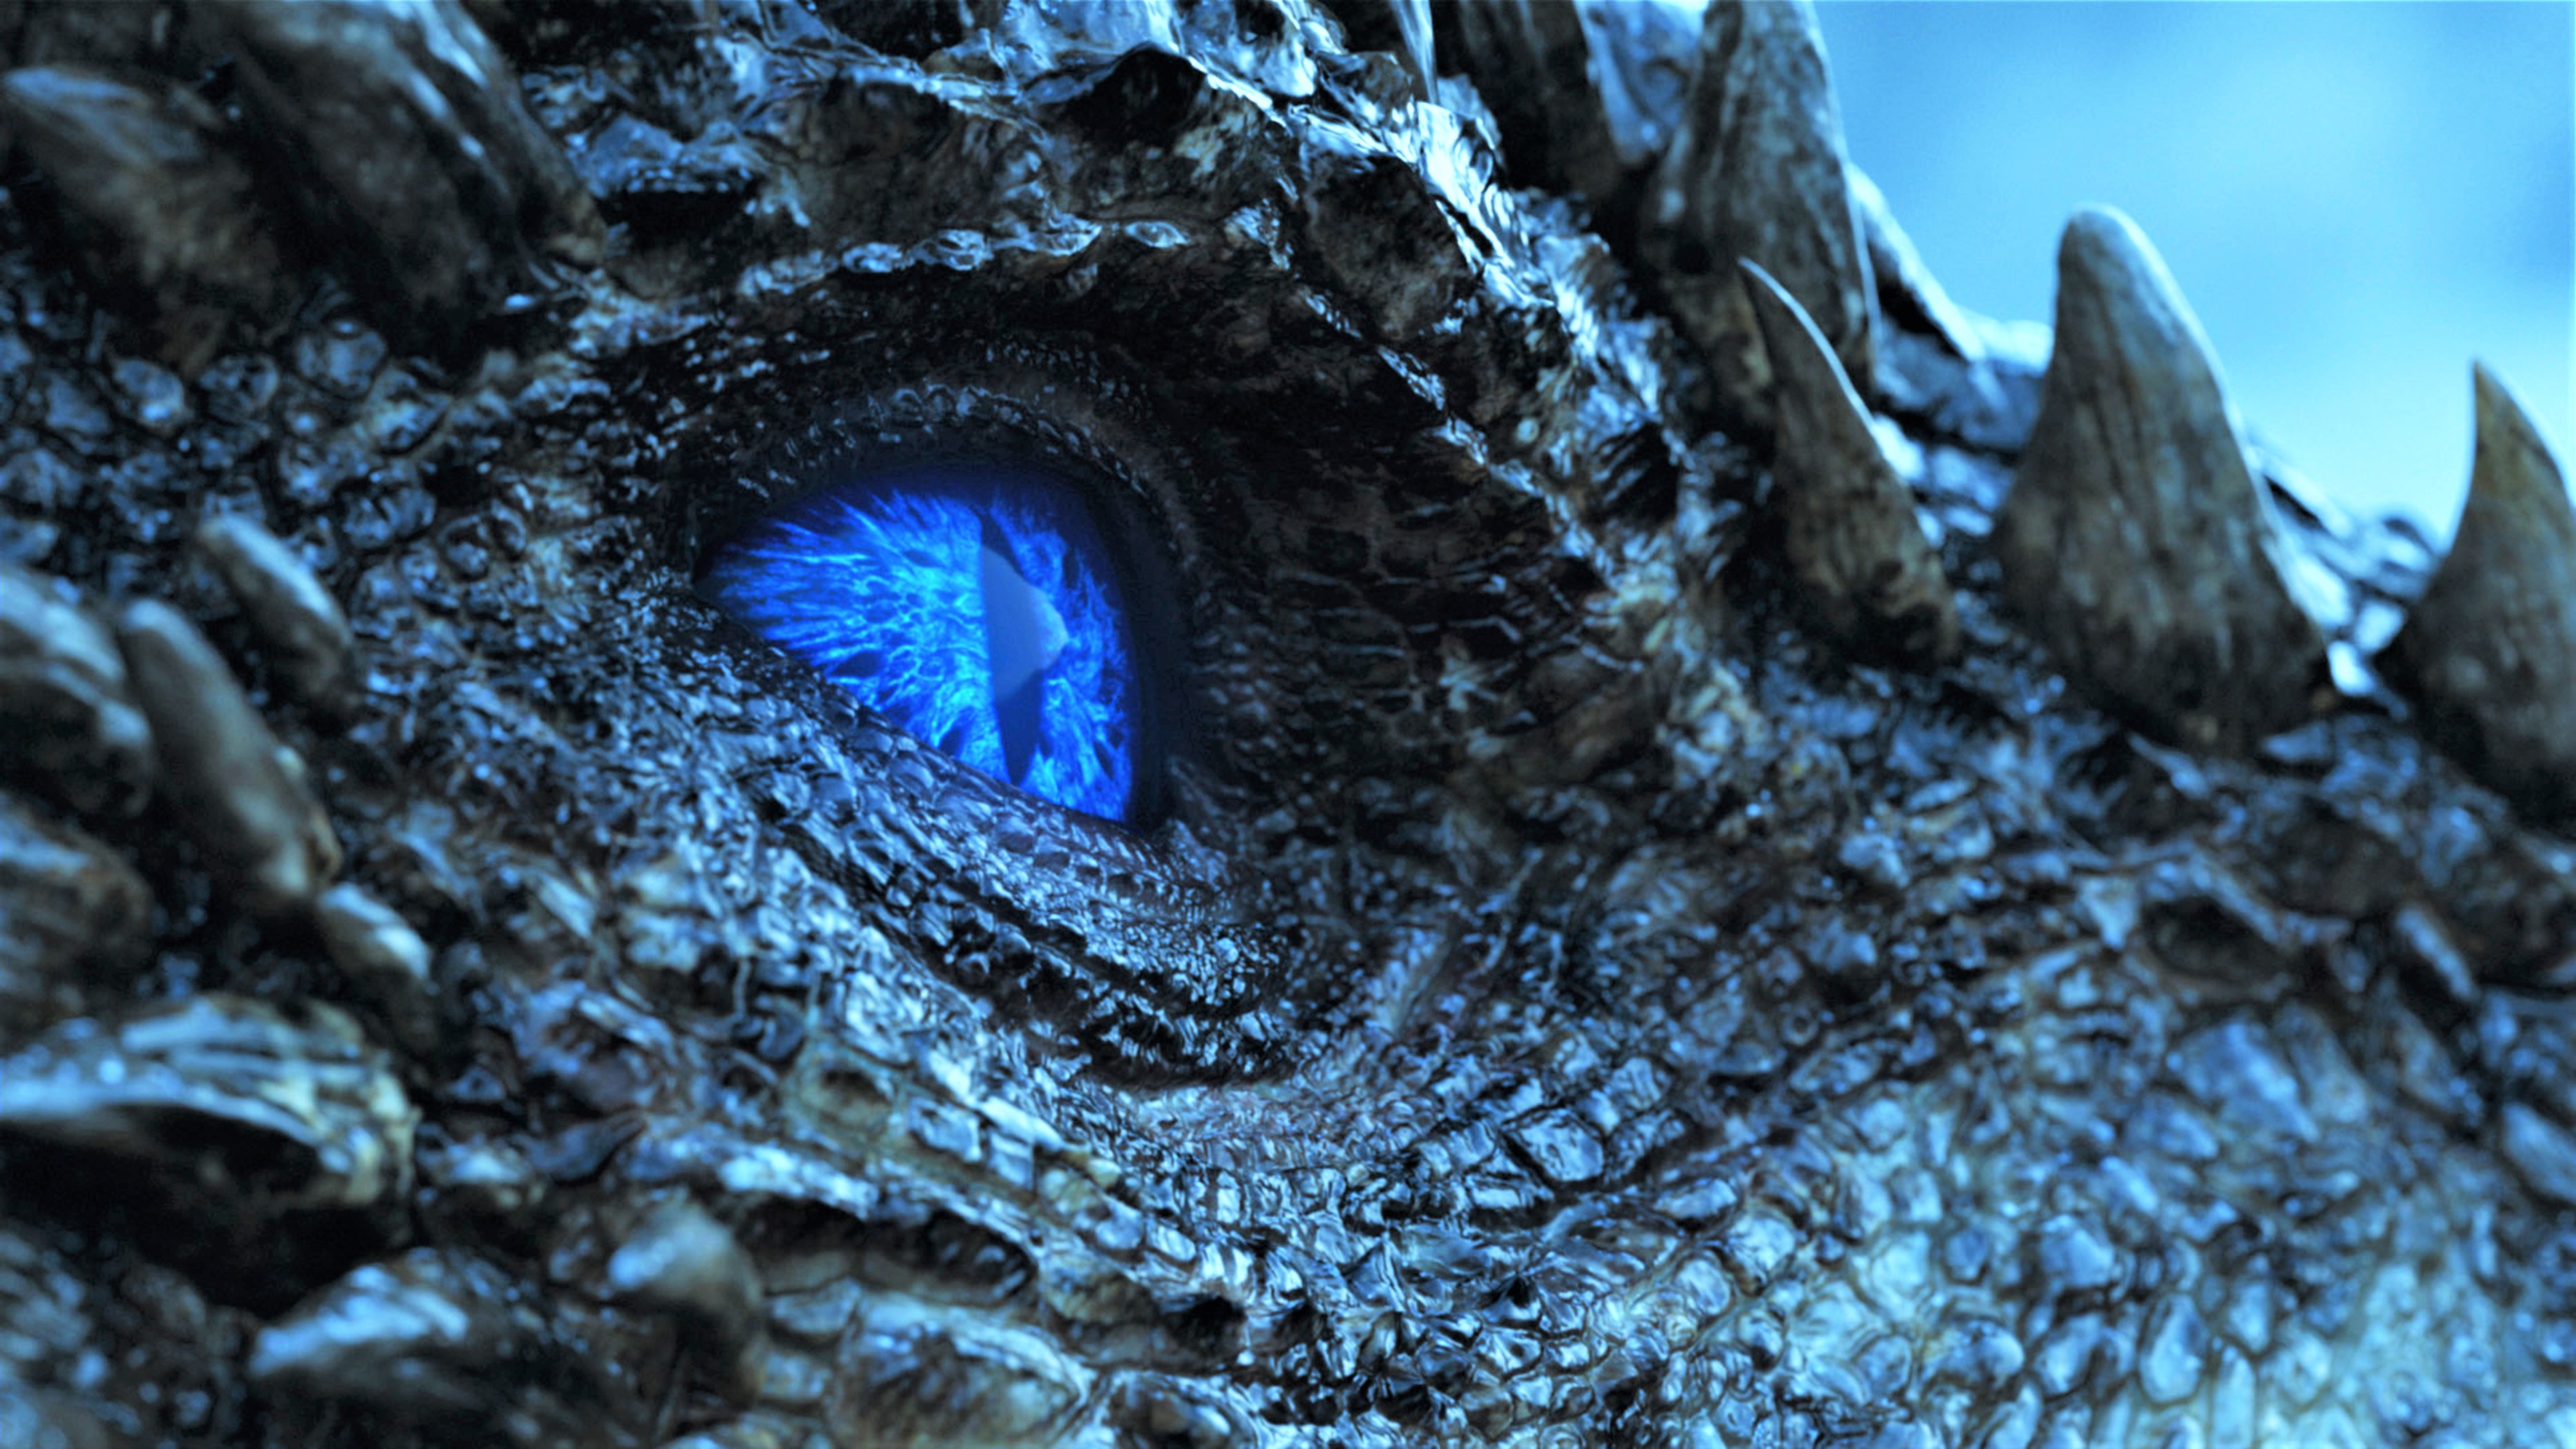 706 - Beyond the Wall - Frozen Lake - Wight Viserion